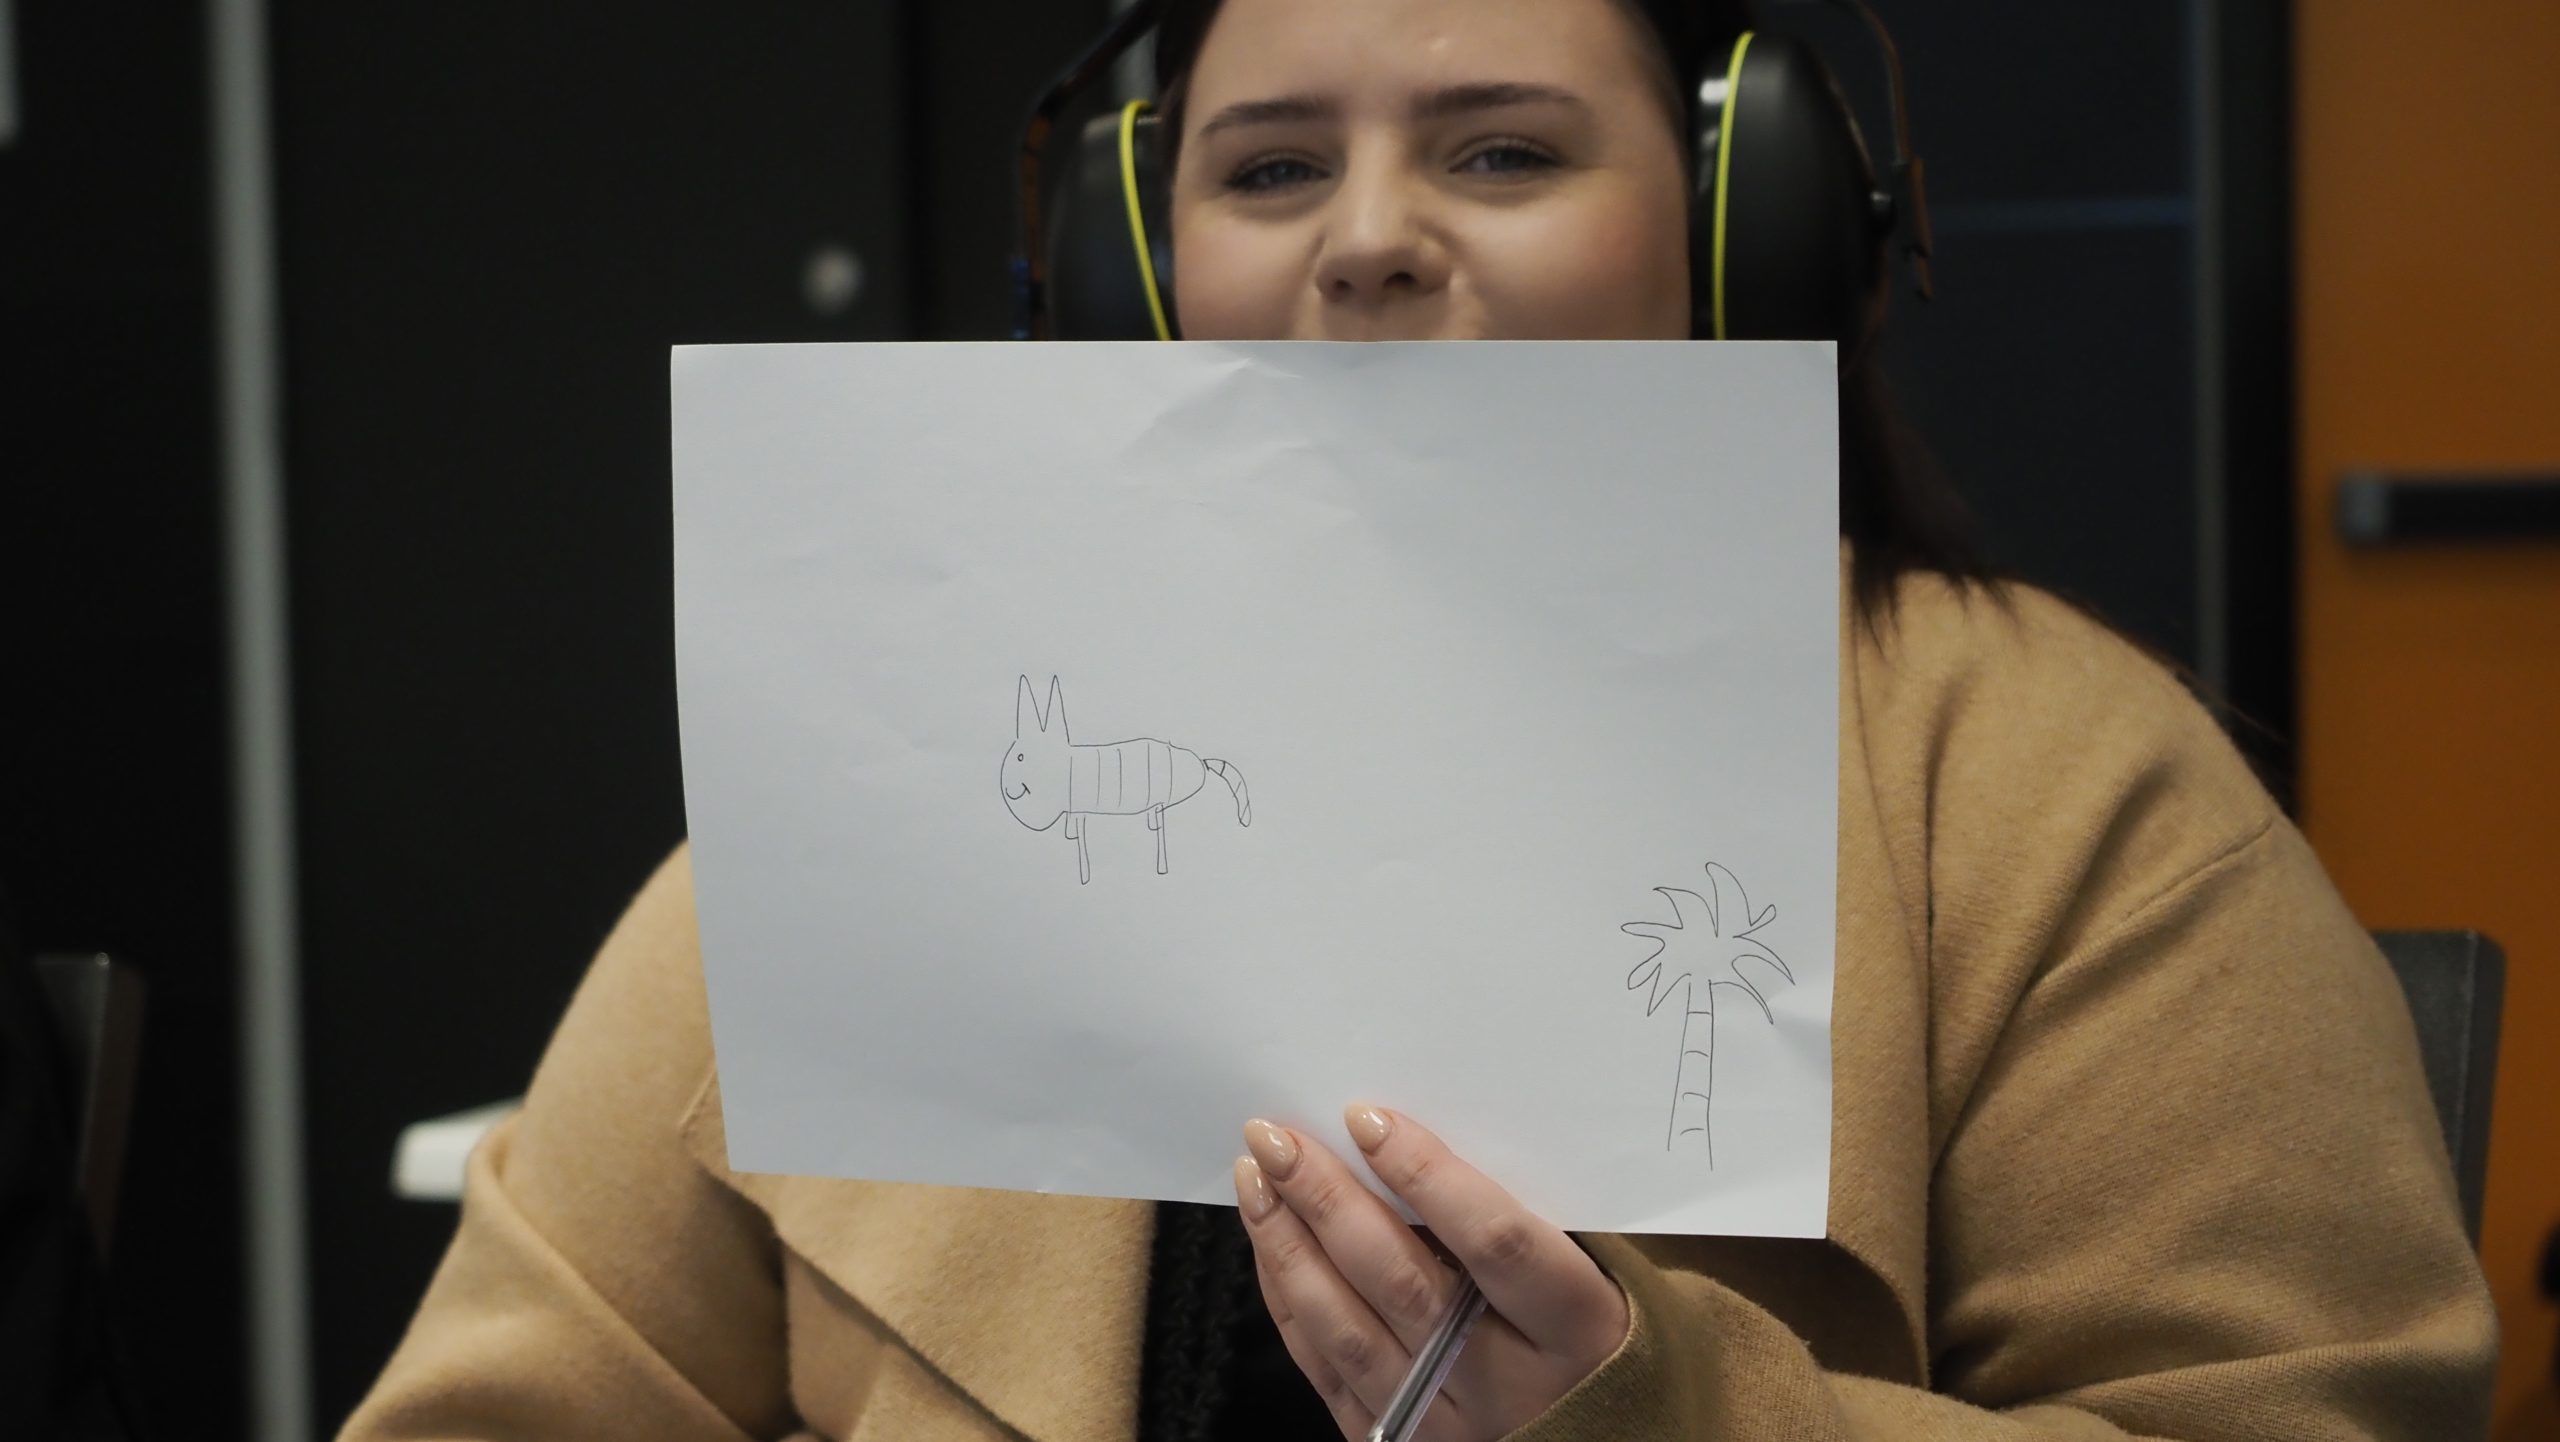 YMCA staff memer holding up white piece of paper with drawing on it